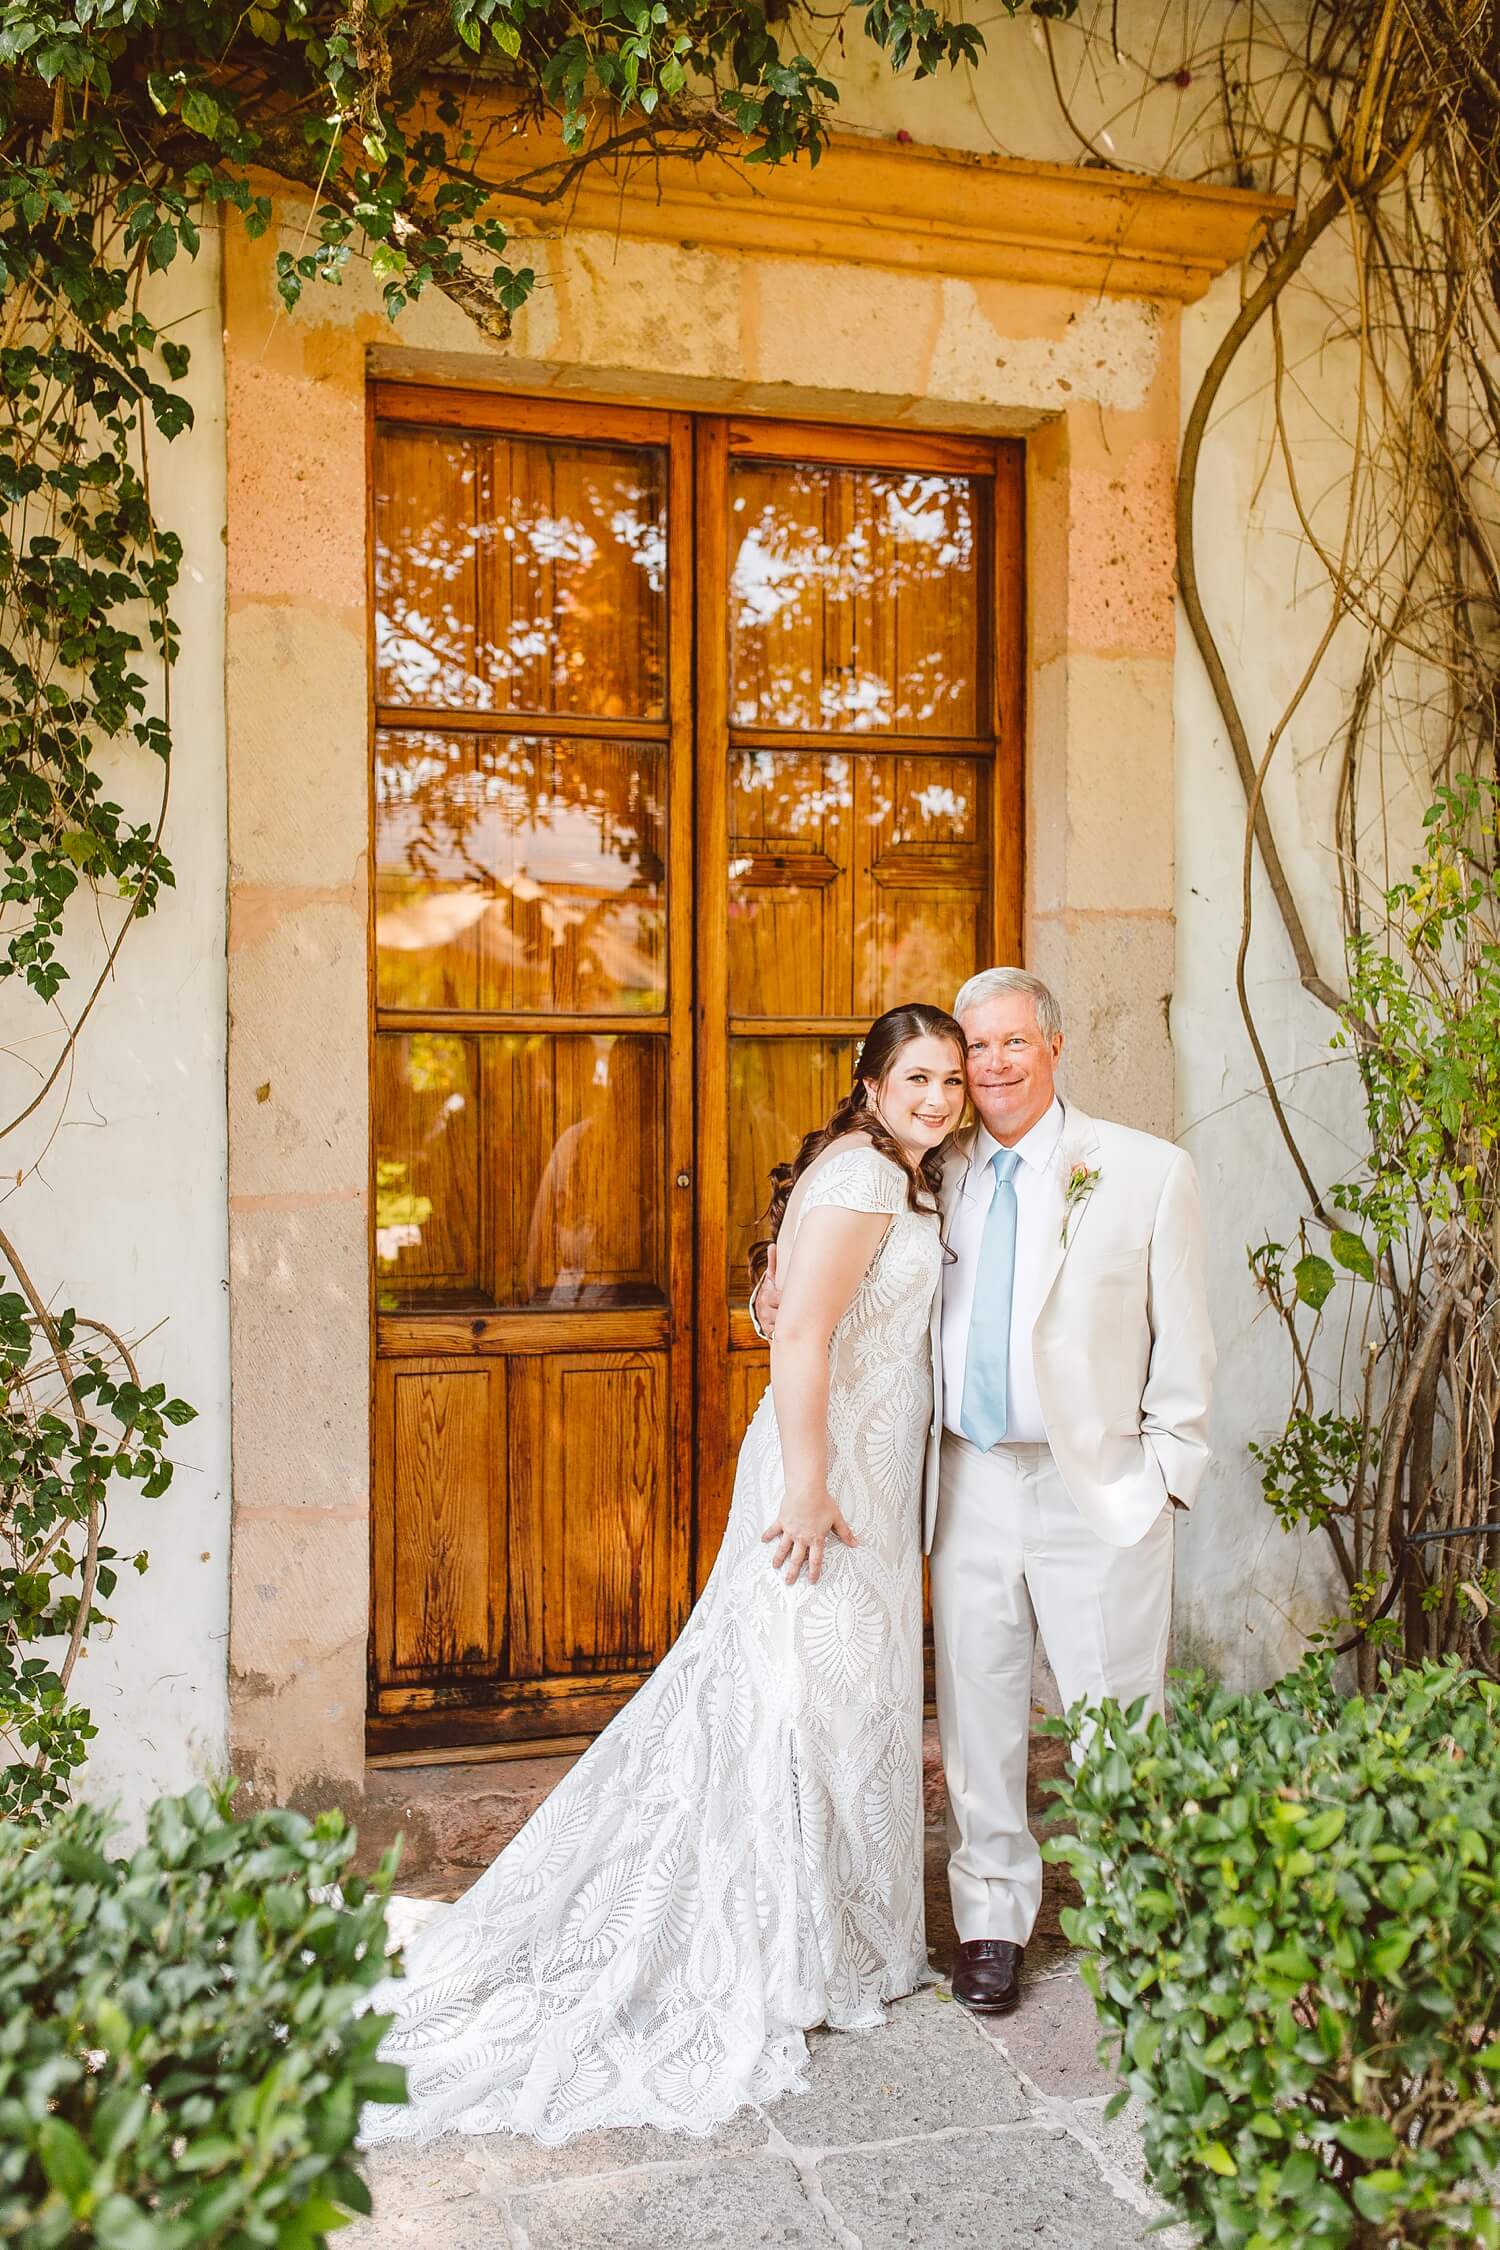 First look between father and daughter at Hacienda Amazcala | Brooke Michelle Photo